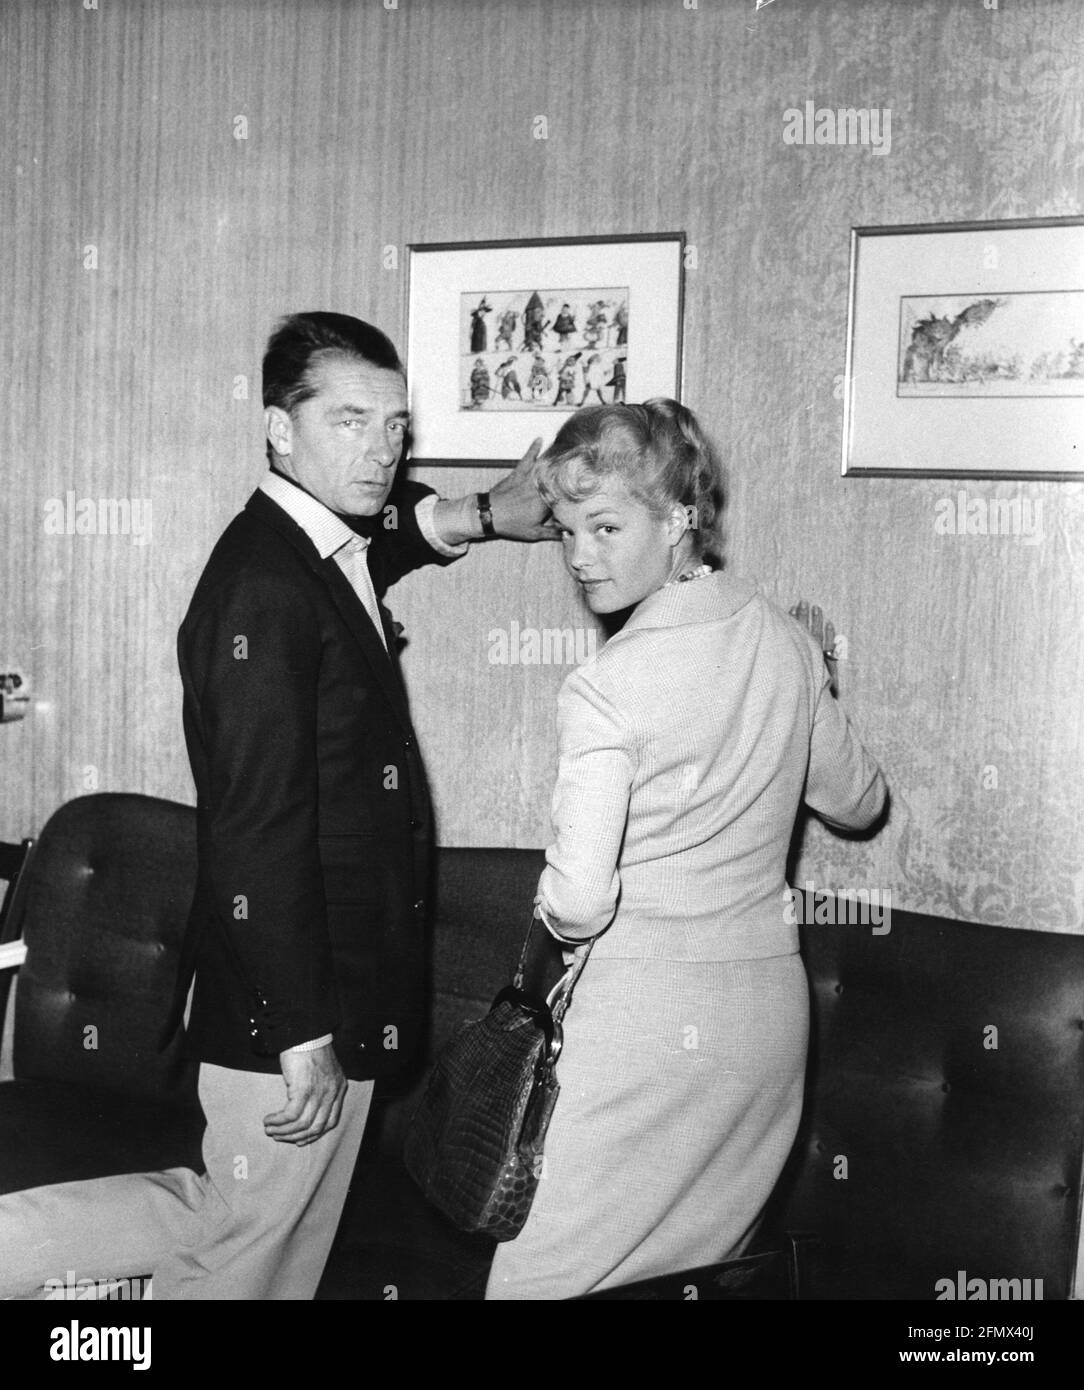 Schneider, Romy, 23.9.1938 - 29.5.1982, German actress, half length, with Herbert von Karajan, 1958, ADDITIONAL-RIGHTS-CLEARANCE-INFO-NOT-AVAILABLE Stock Photo